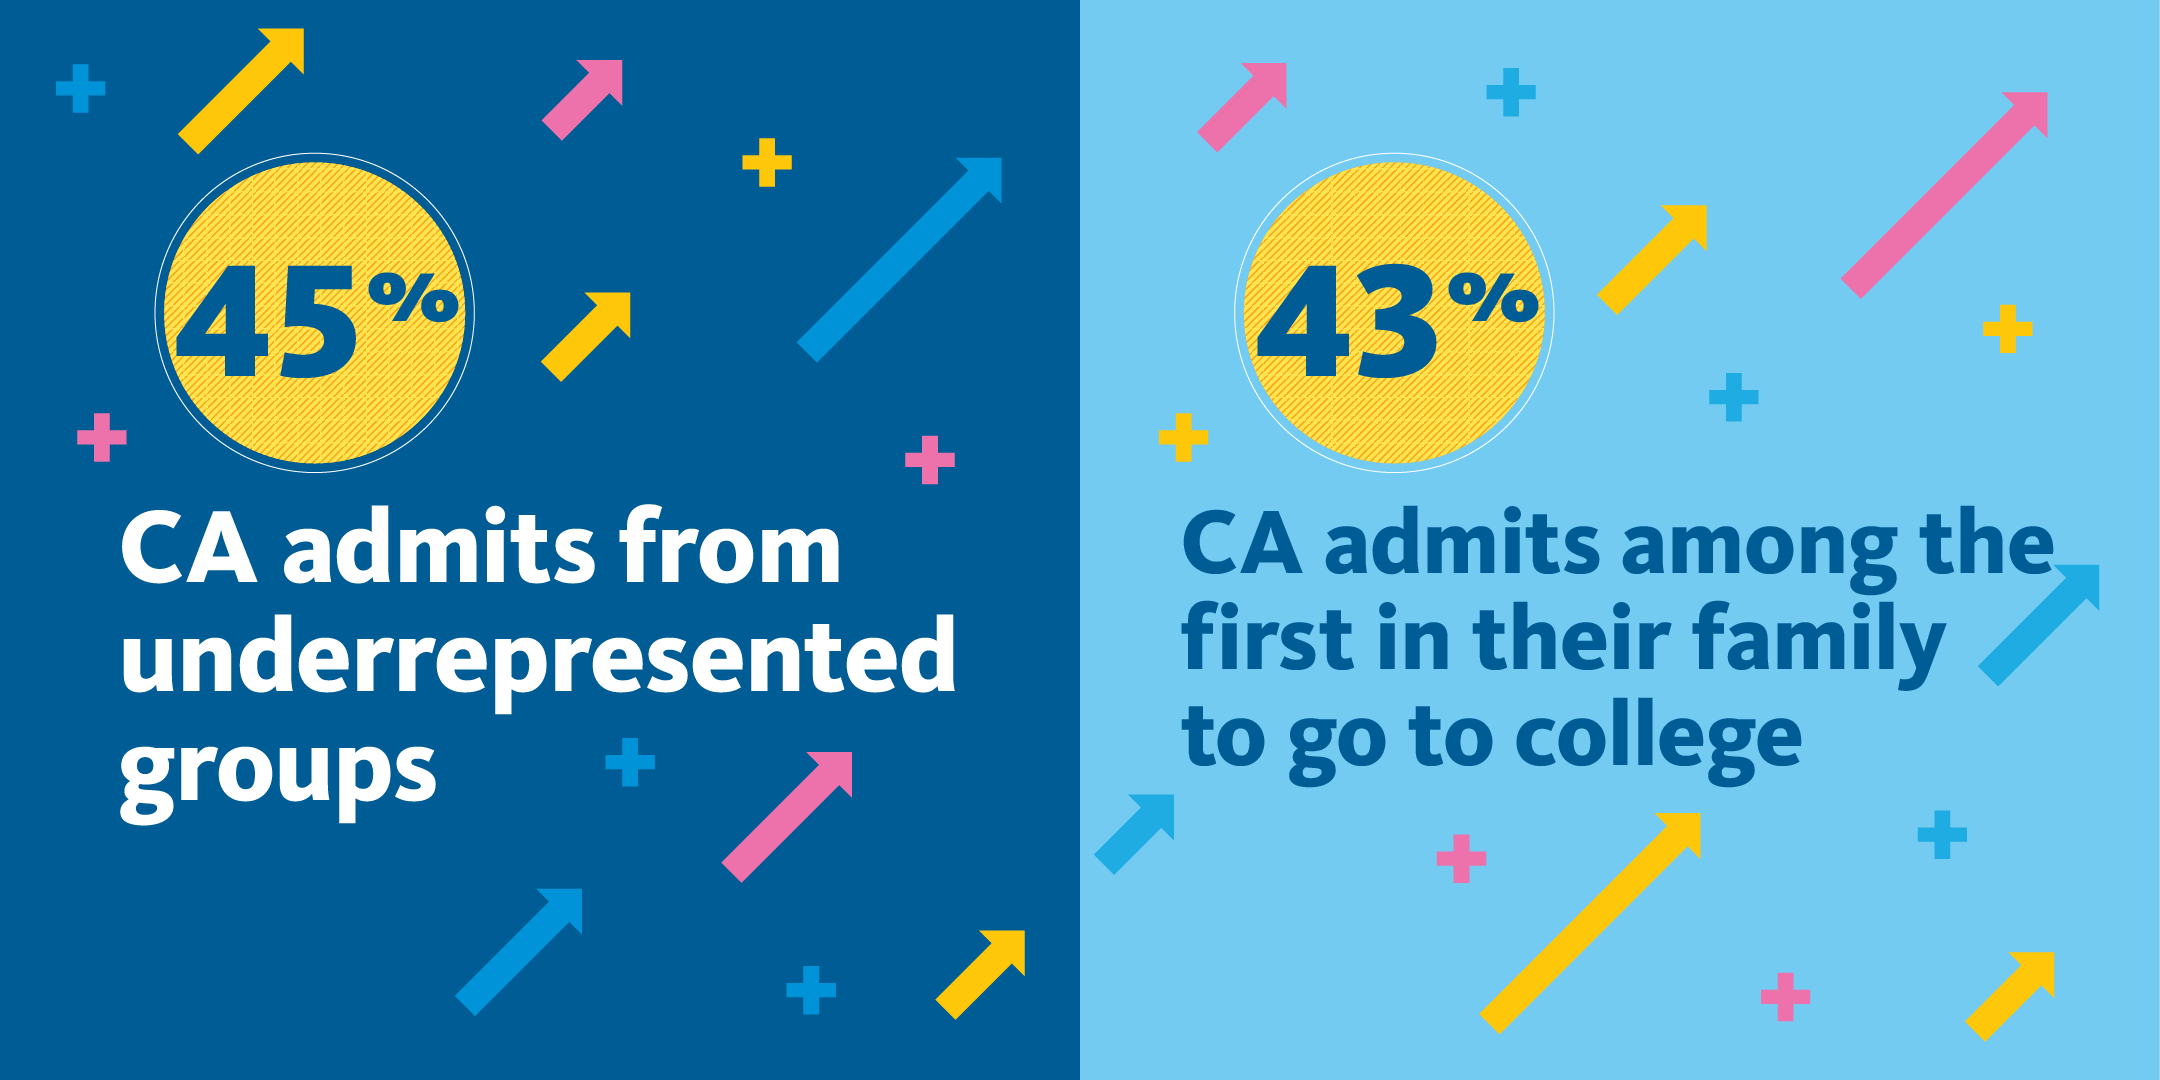 Two charts side by side: One with 45% in a gold circle with text reading CA admits from underrepresented groups below it; the other with 43% in a gold circle with the text CA admits among the first in their family to go to college under it